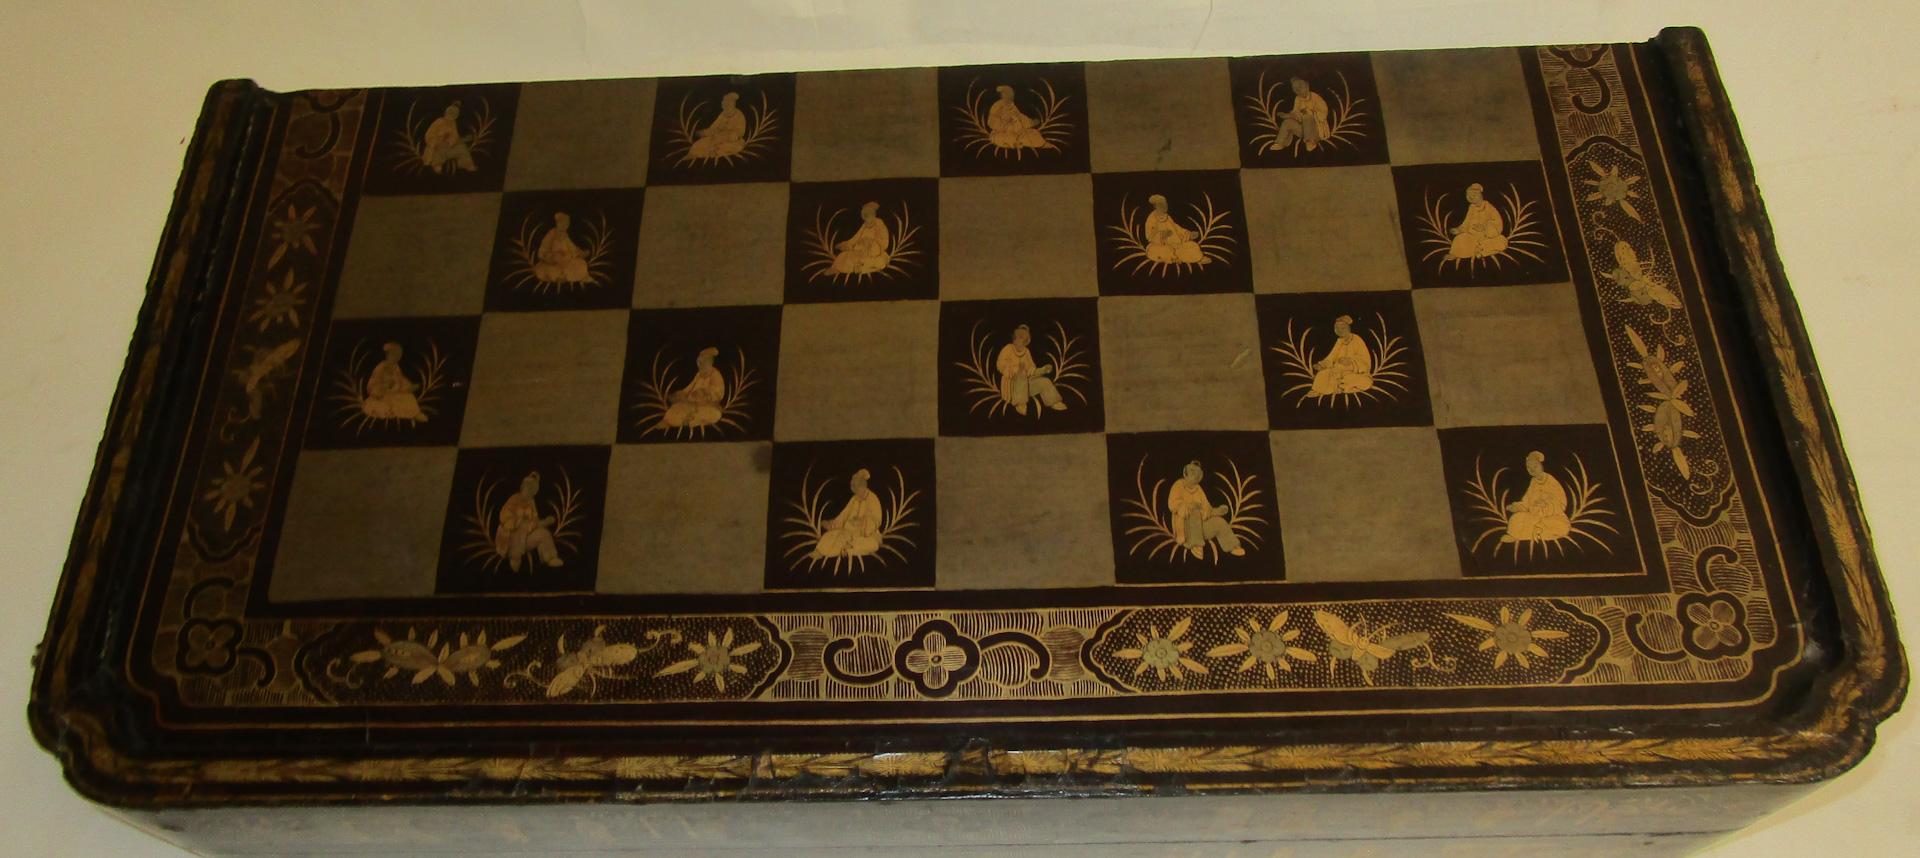 antique chinese ivory chess set